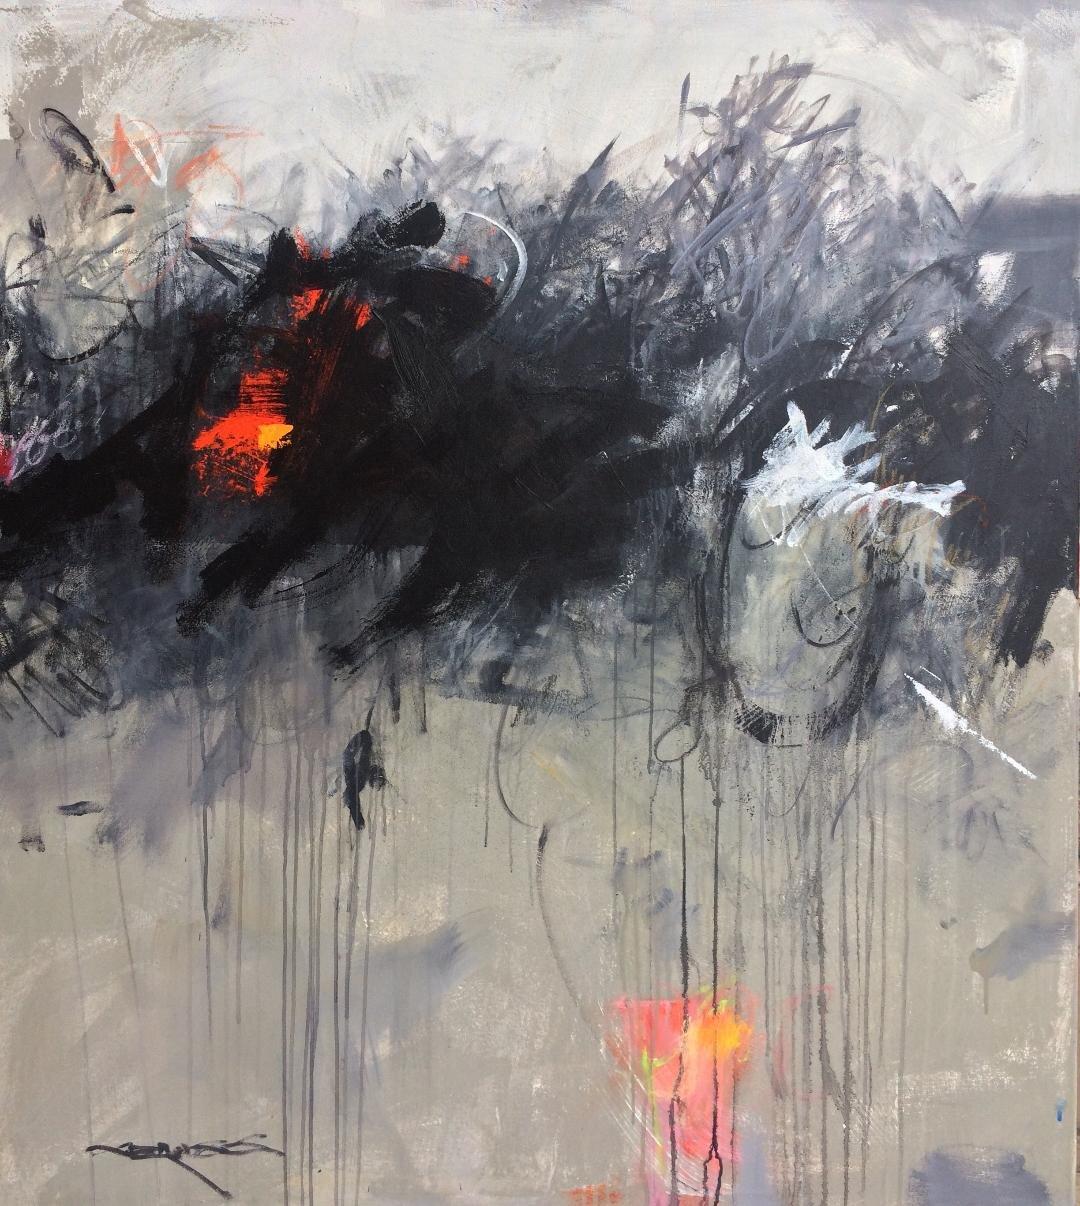 C.E. Ross, "Lost Horizons", Dark Stormy Abstract Painting on Canvas